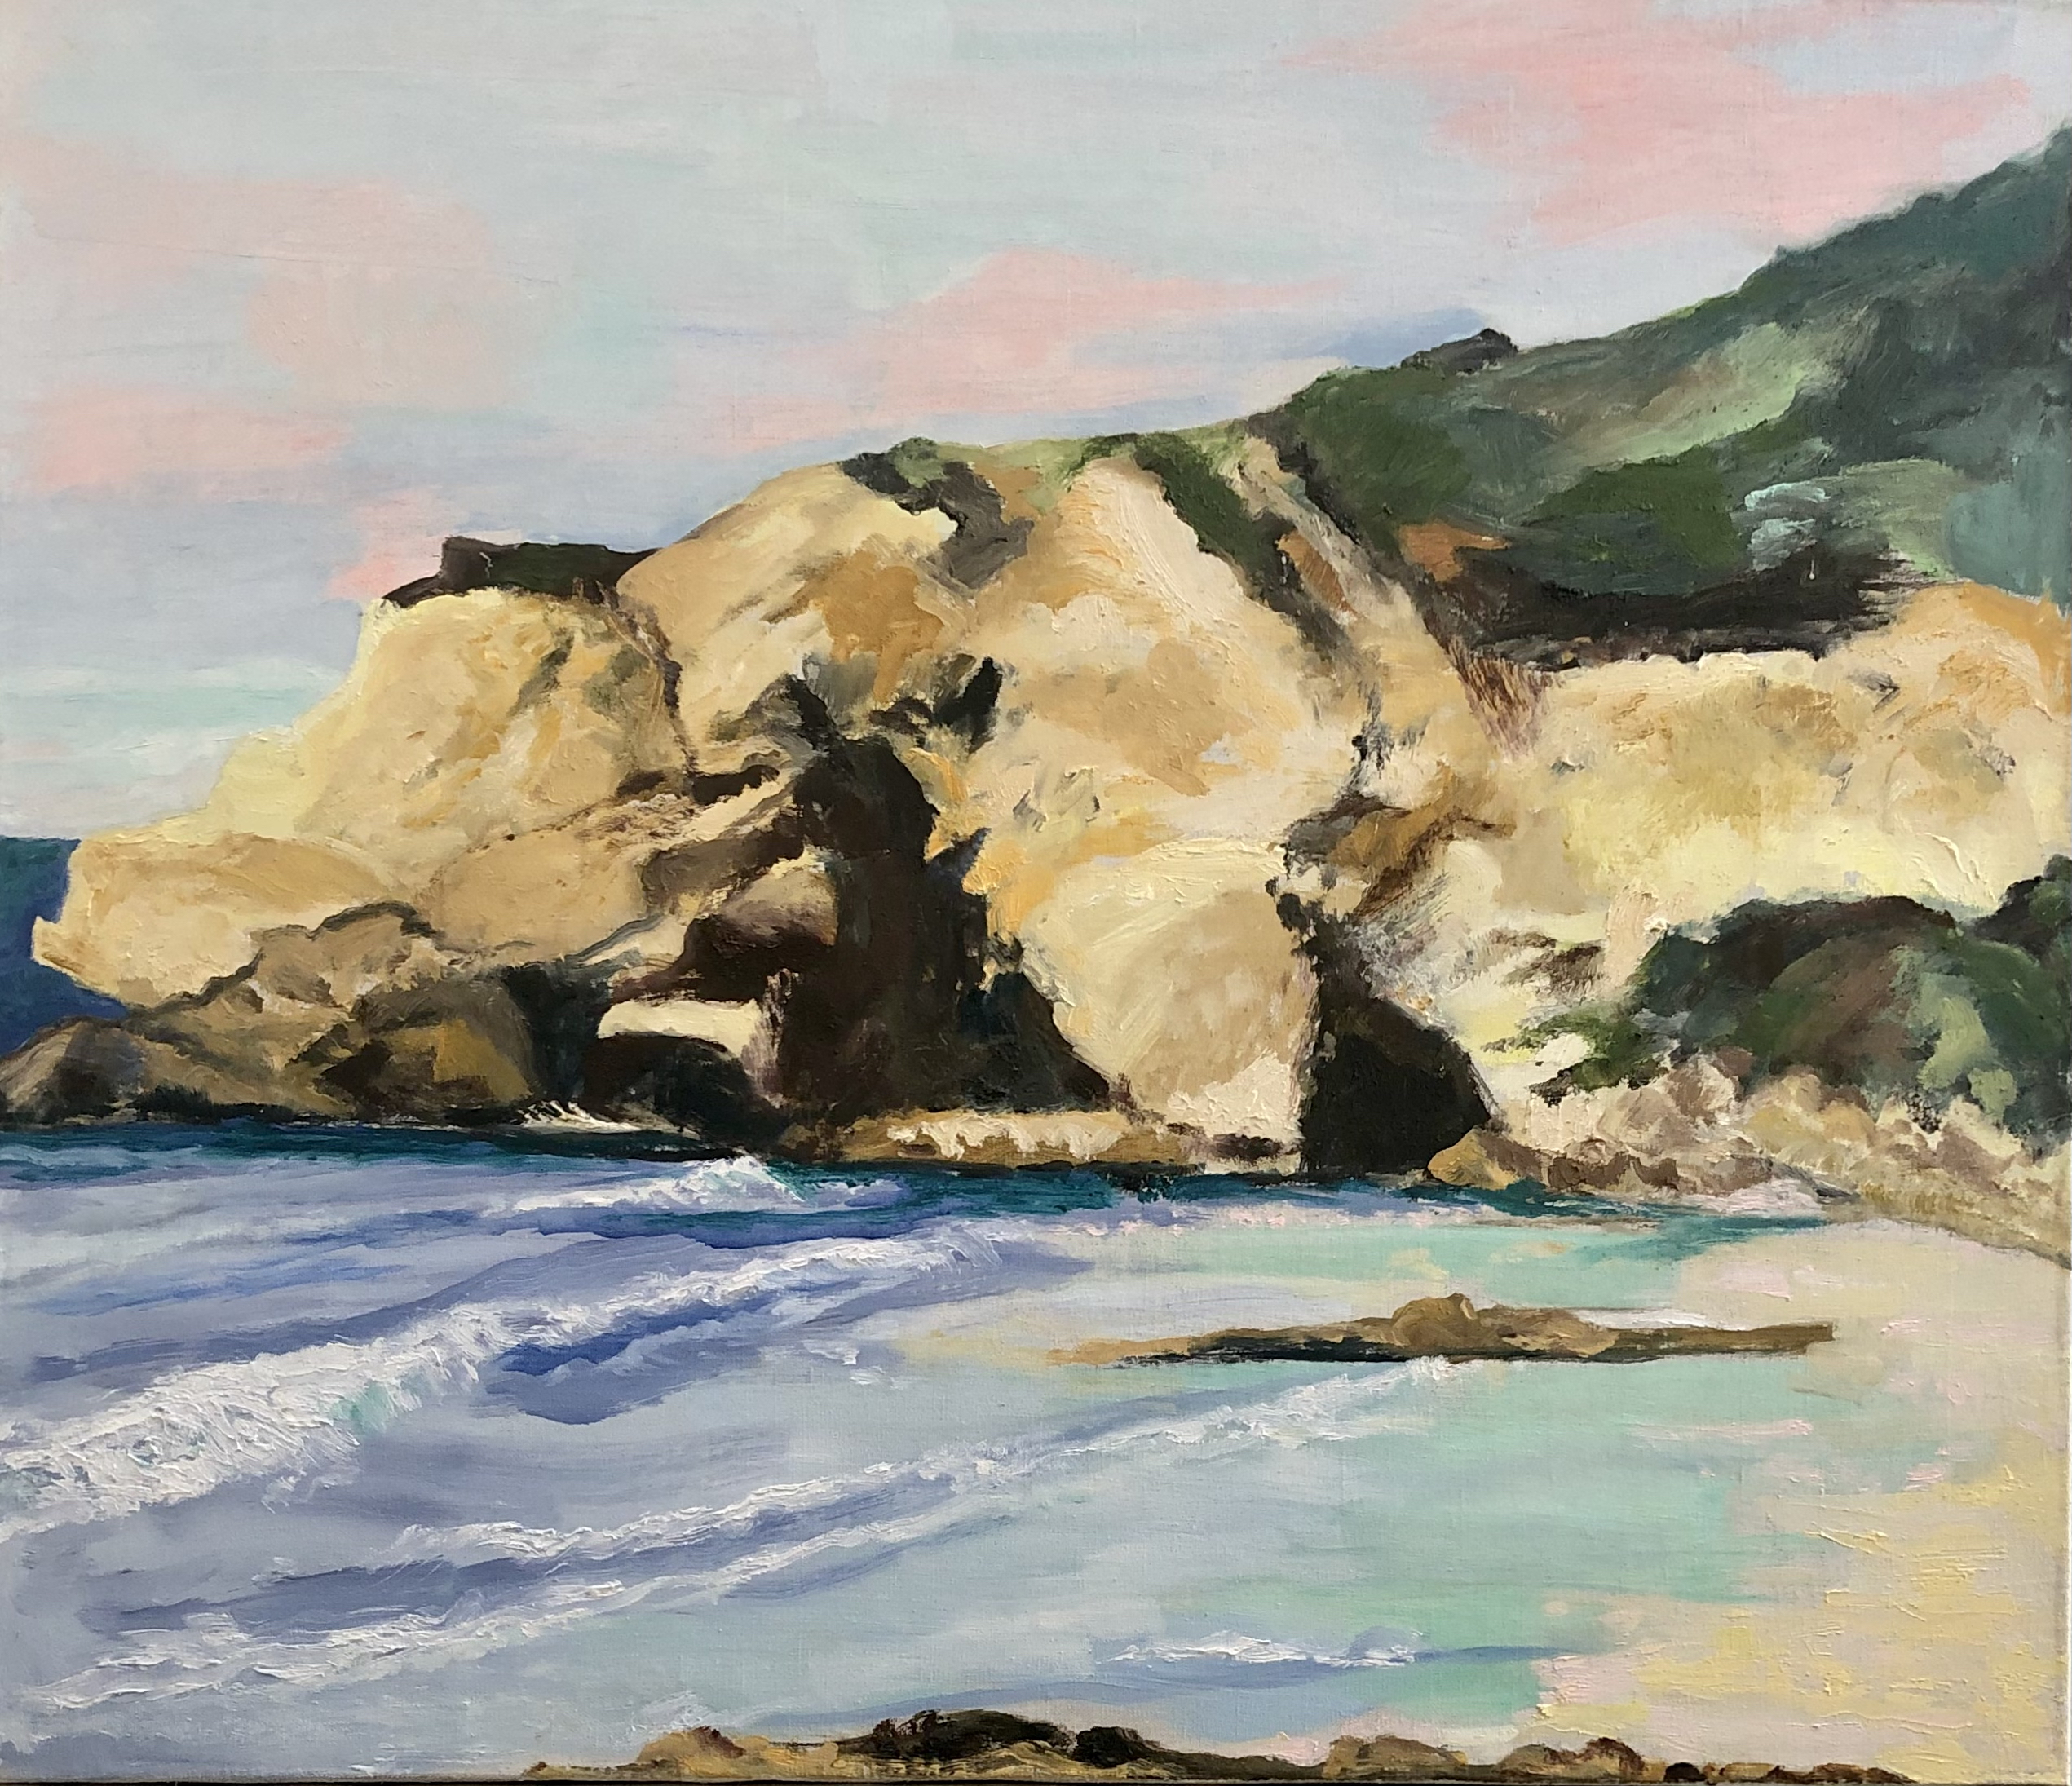 Image of - Crystal Cove on a Warm Day